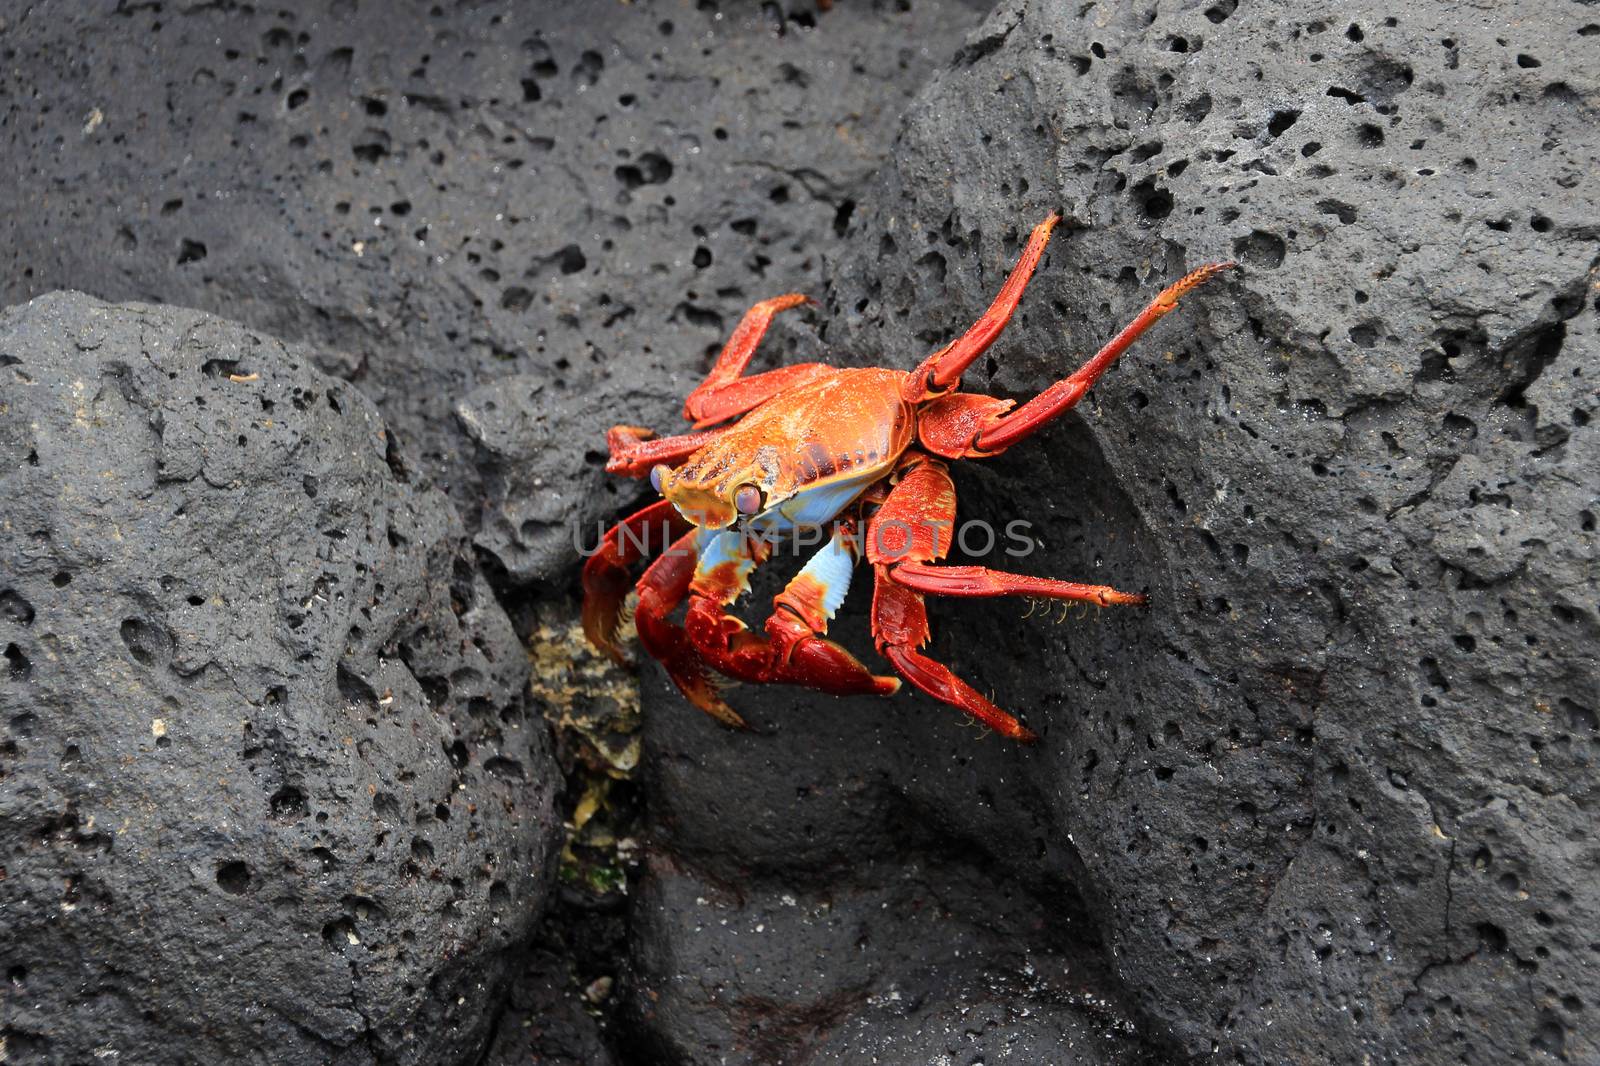 Grapsus crab on volcanic rock by cicloco